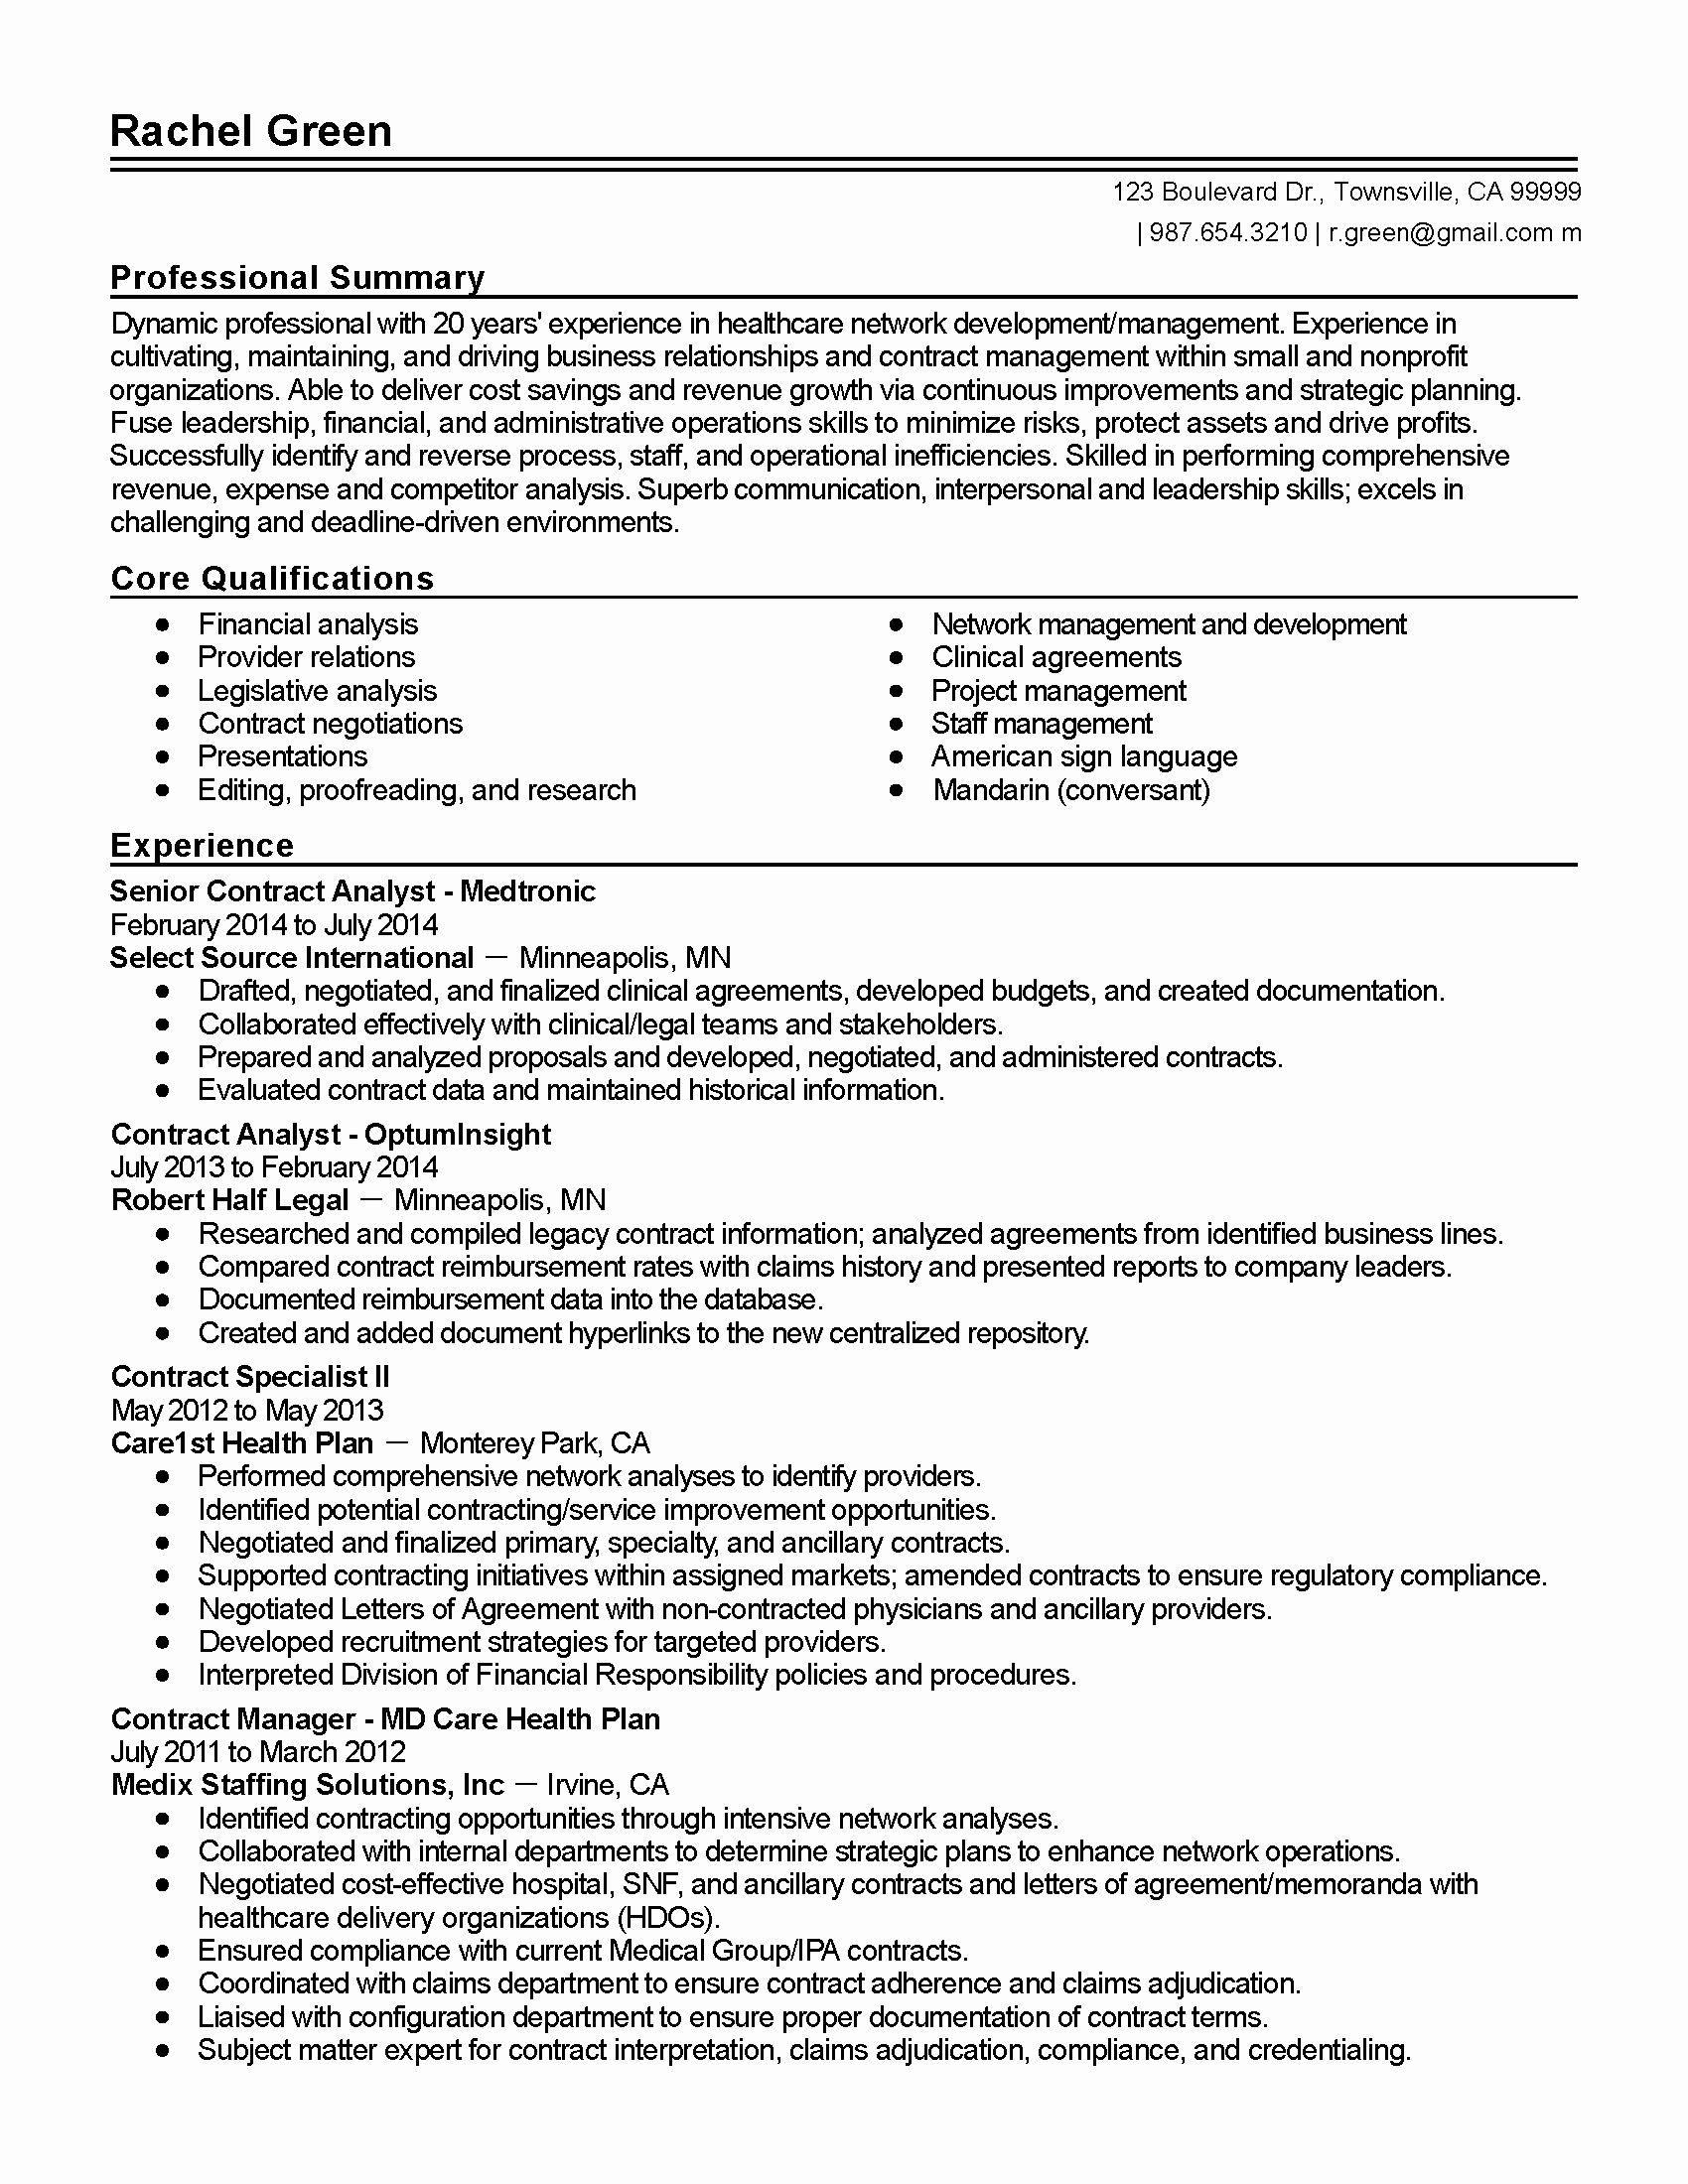 Talent Management Contract Template Lovely Professional Senior Healthcare Contract Analyst Templates